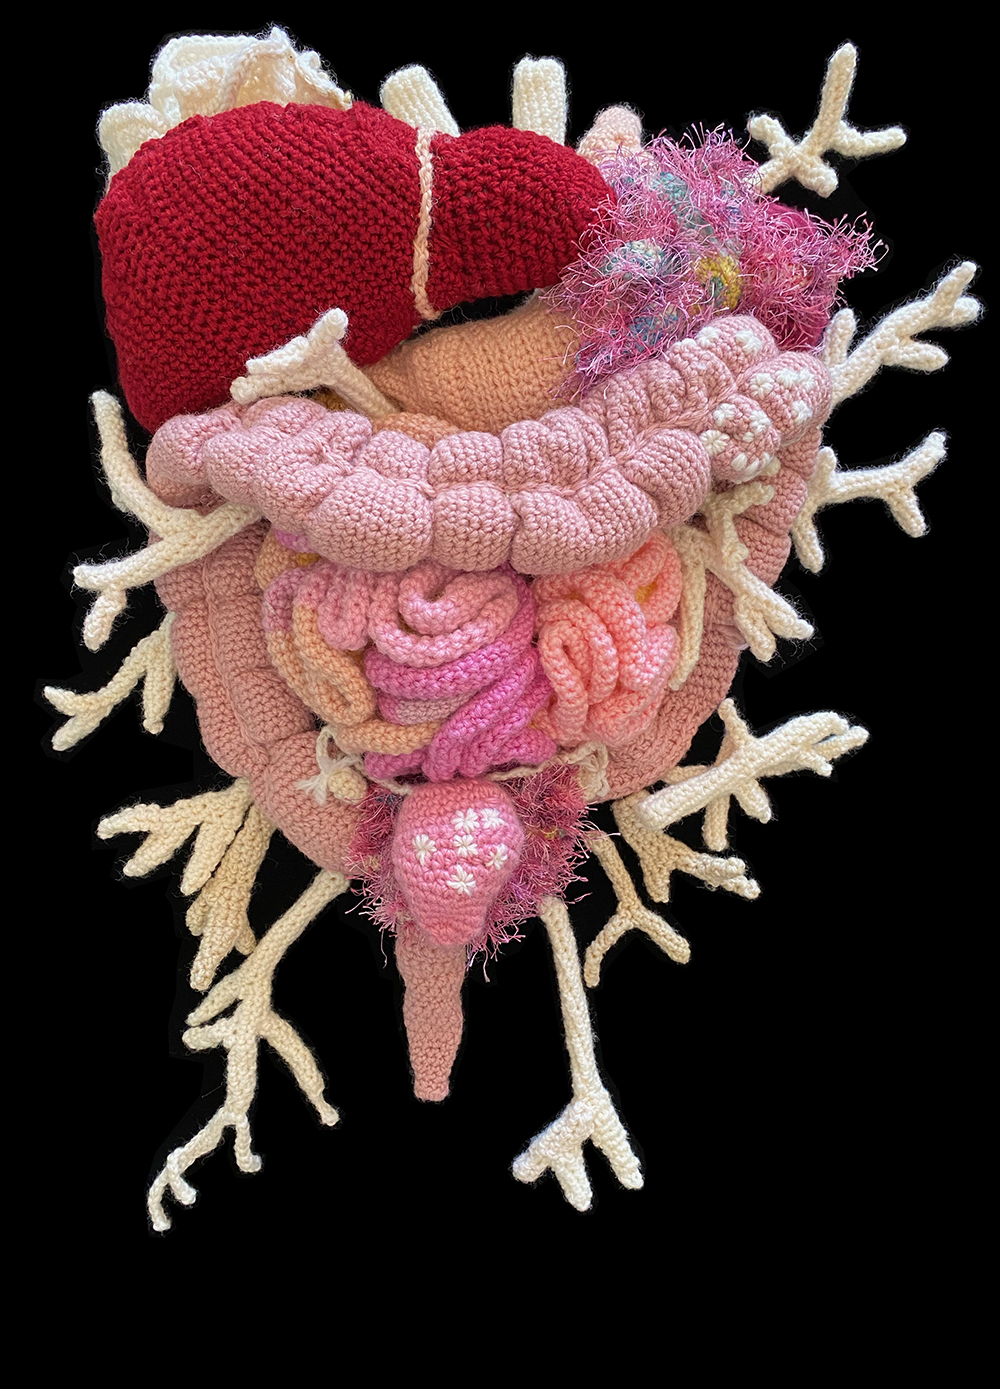 Crochet organs including liver, bowel and coral branches.